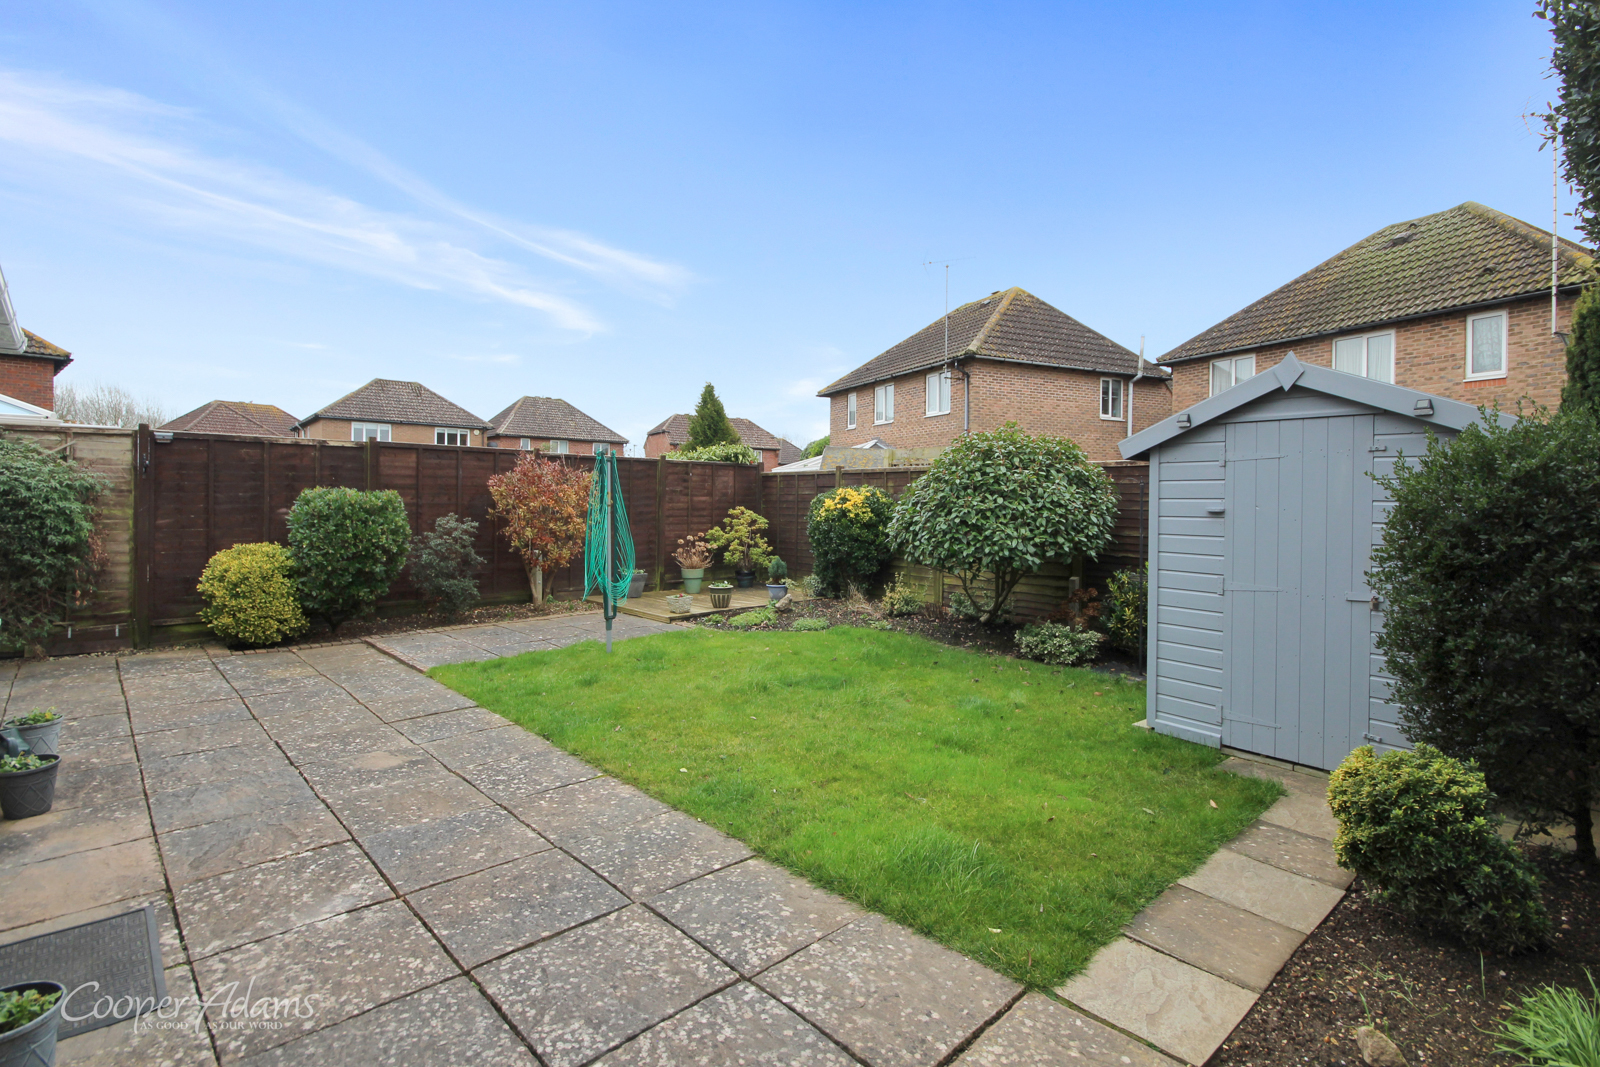 4 bed house for sale in Blenheim Drive, Rustington 3